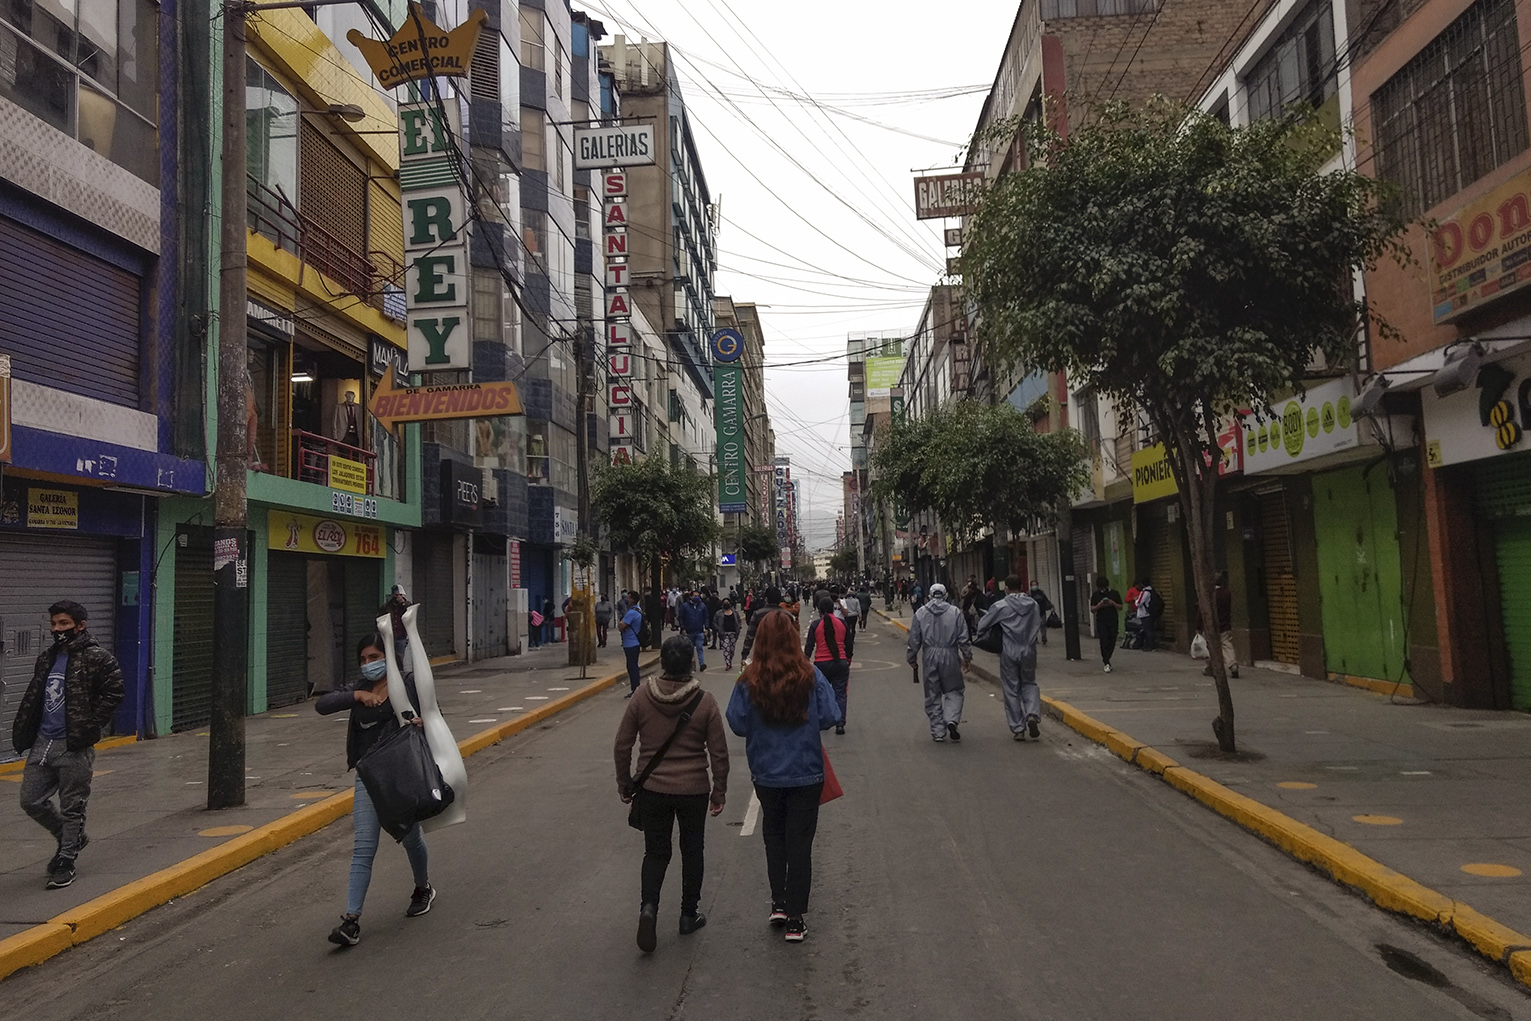 Gamarra, a mini-commercial city in Lima that houses the largest textile conglomerate in Peru